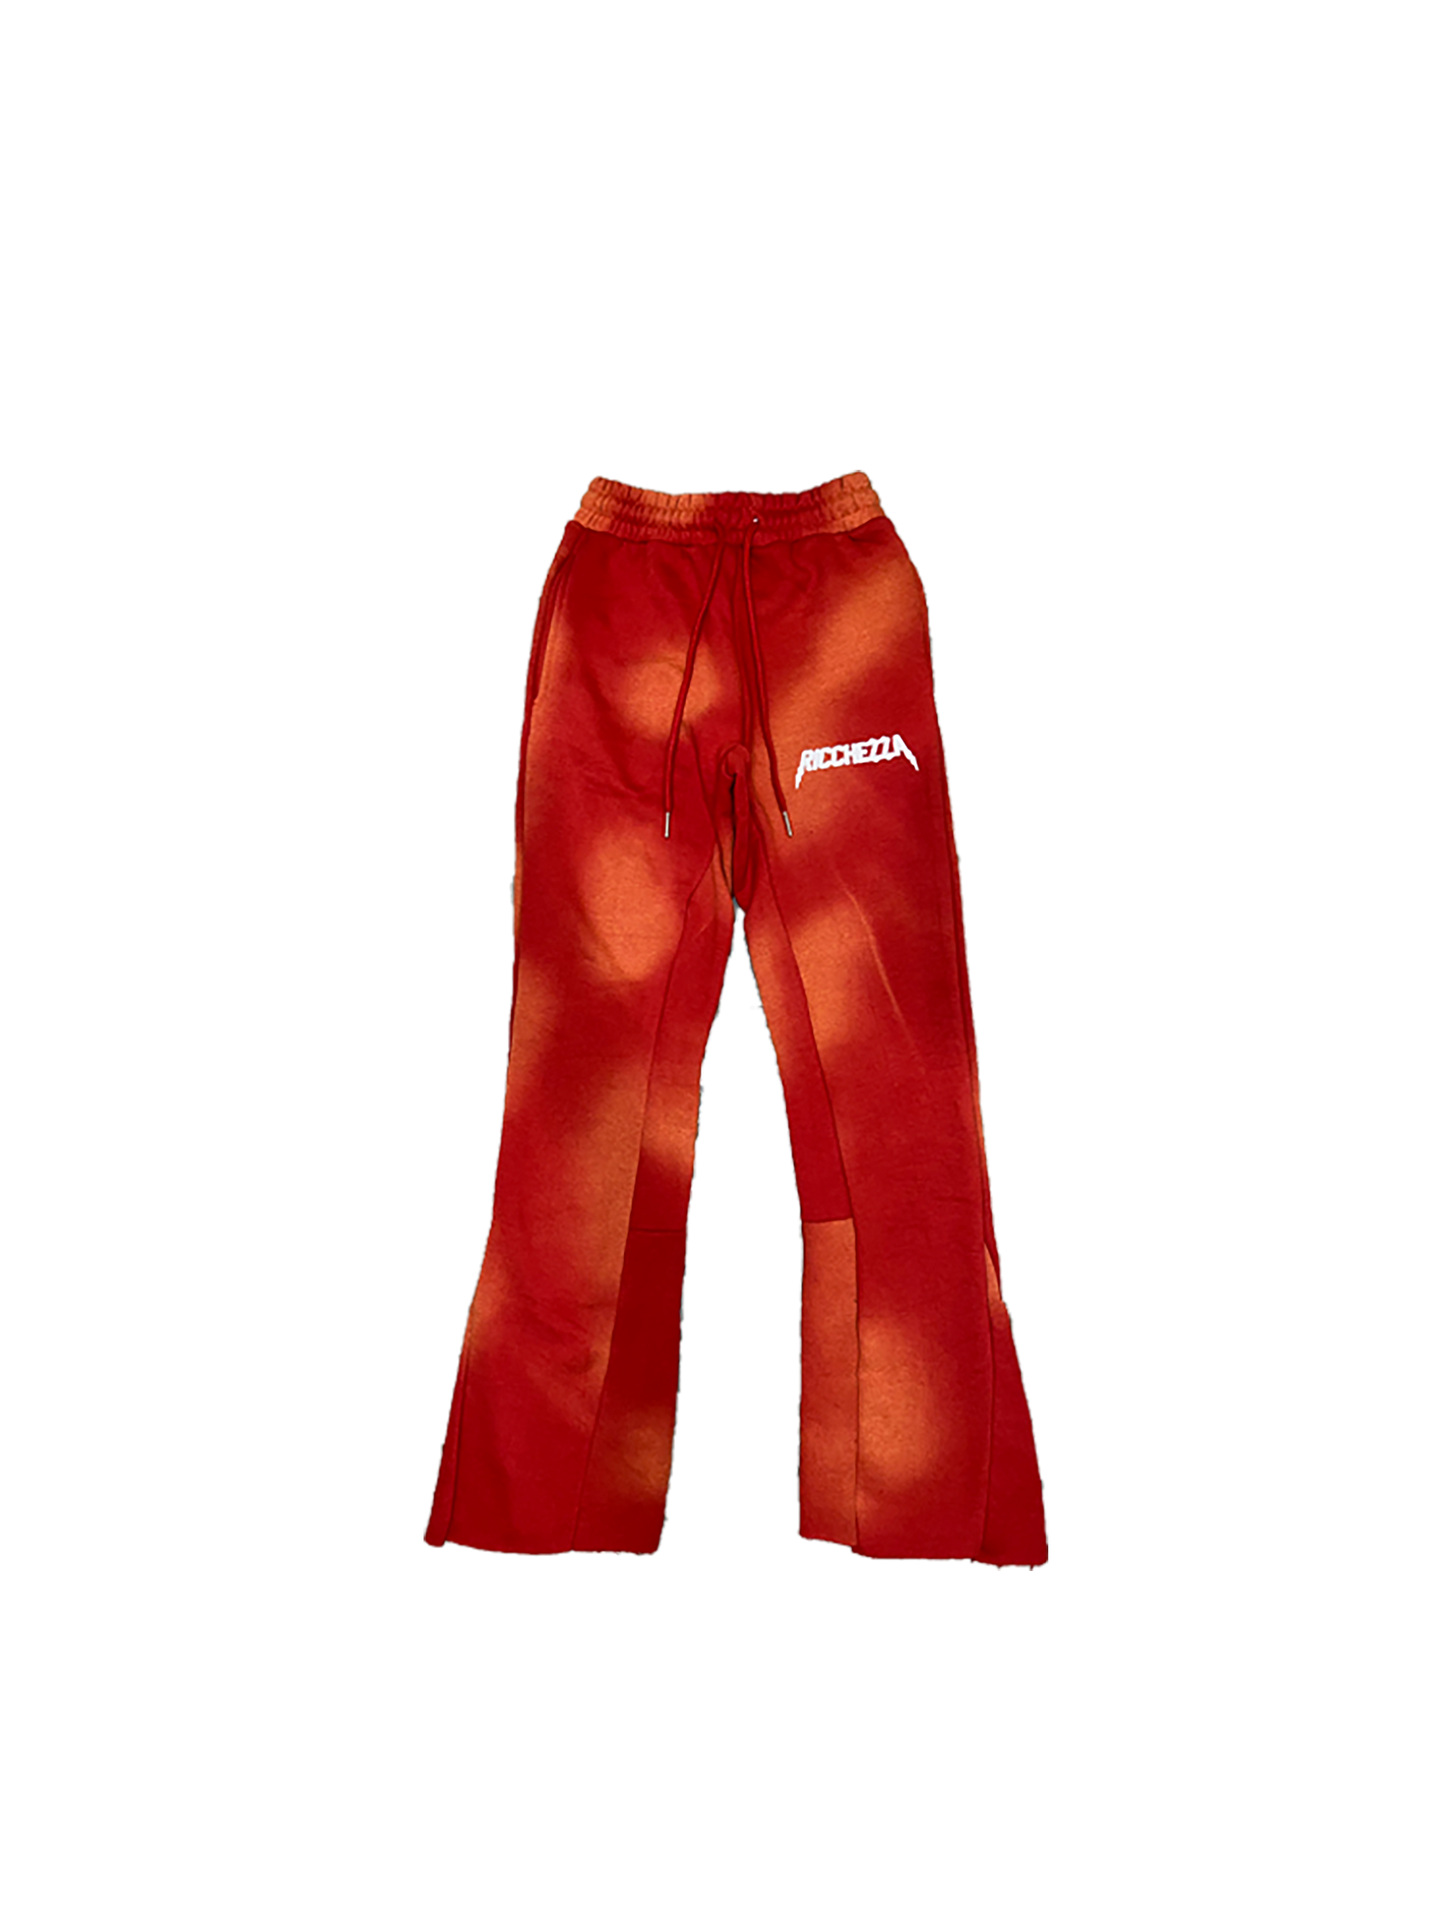 Chezza Clouded Flared Sweat Pants (Red)